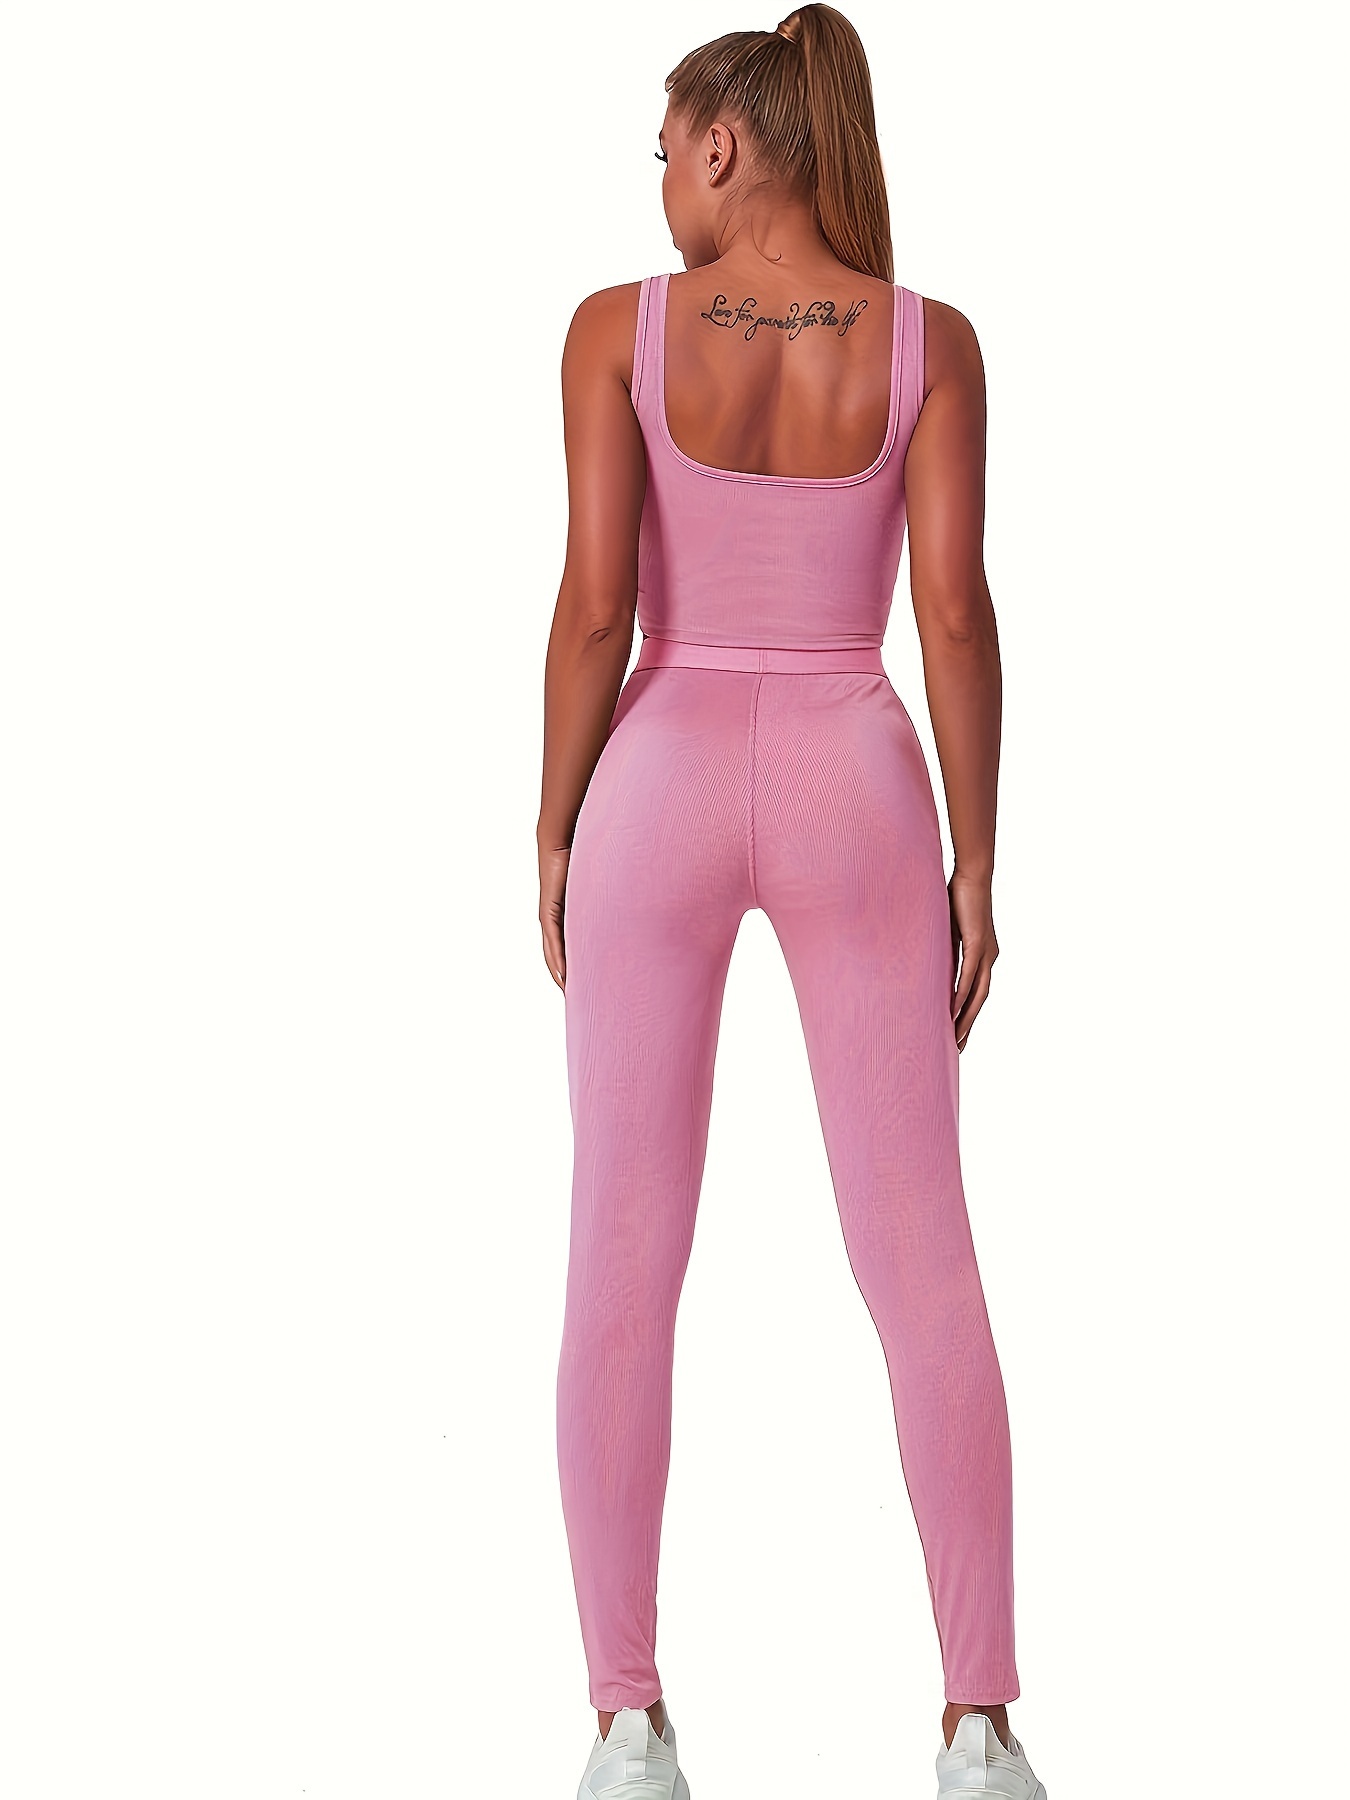 Womens Yoga Sport Set Green/Pink Gym Wear Sets Women Suit For Fitness And Active  Wear L 220330 From Long01, $22.8